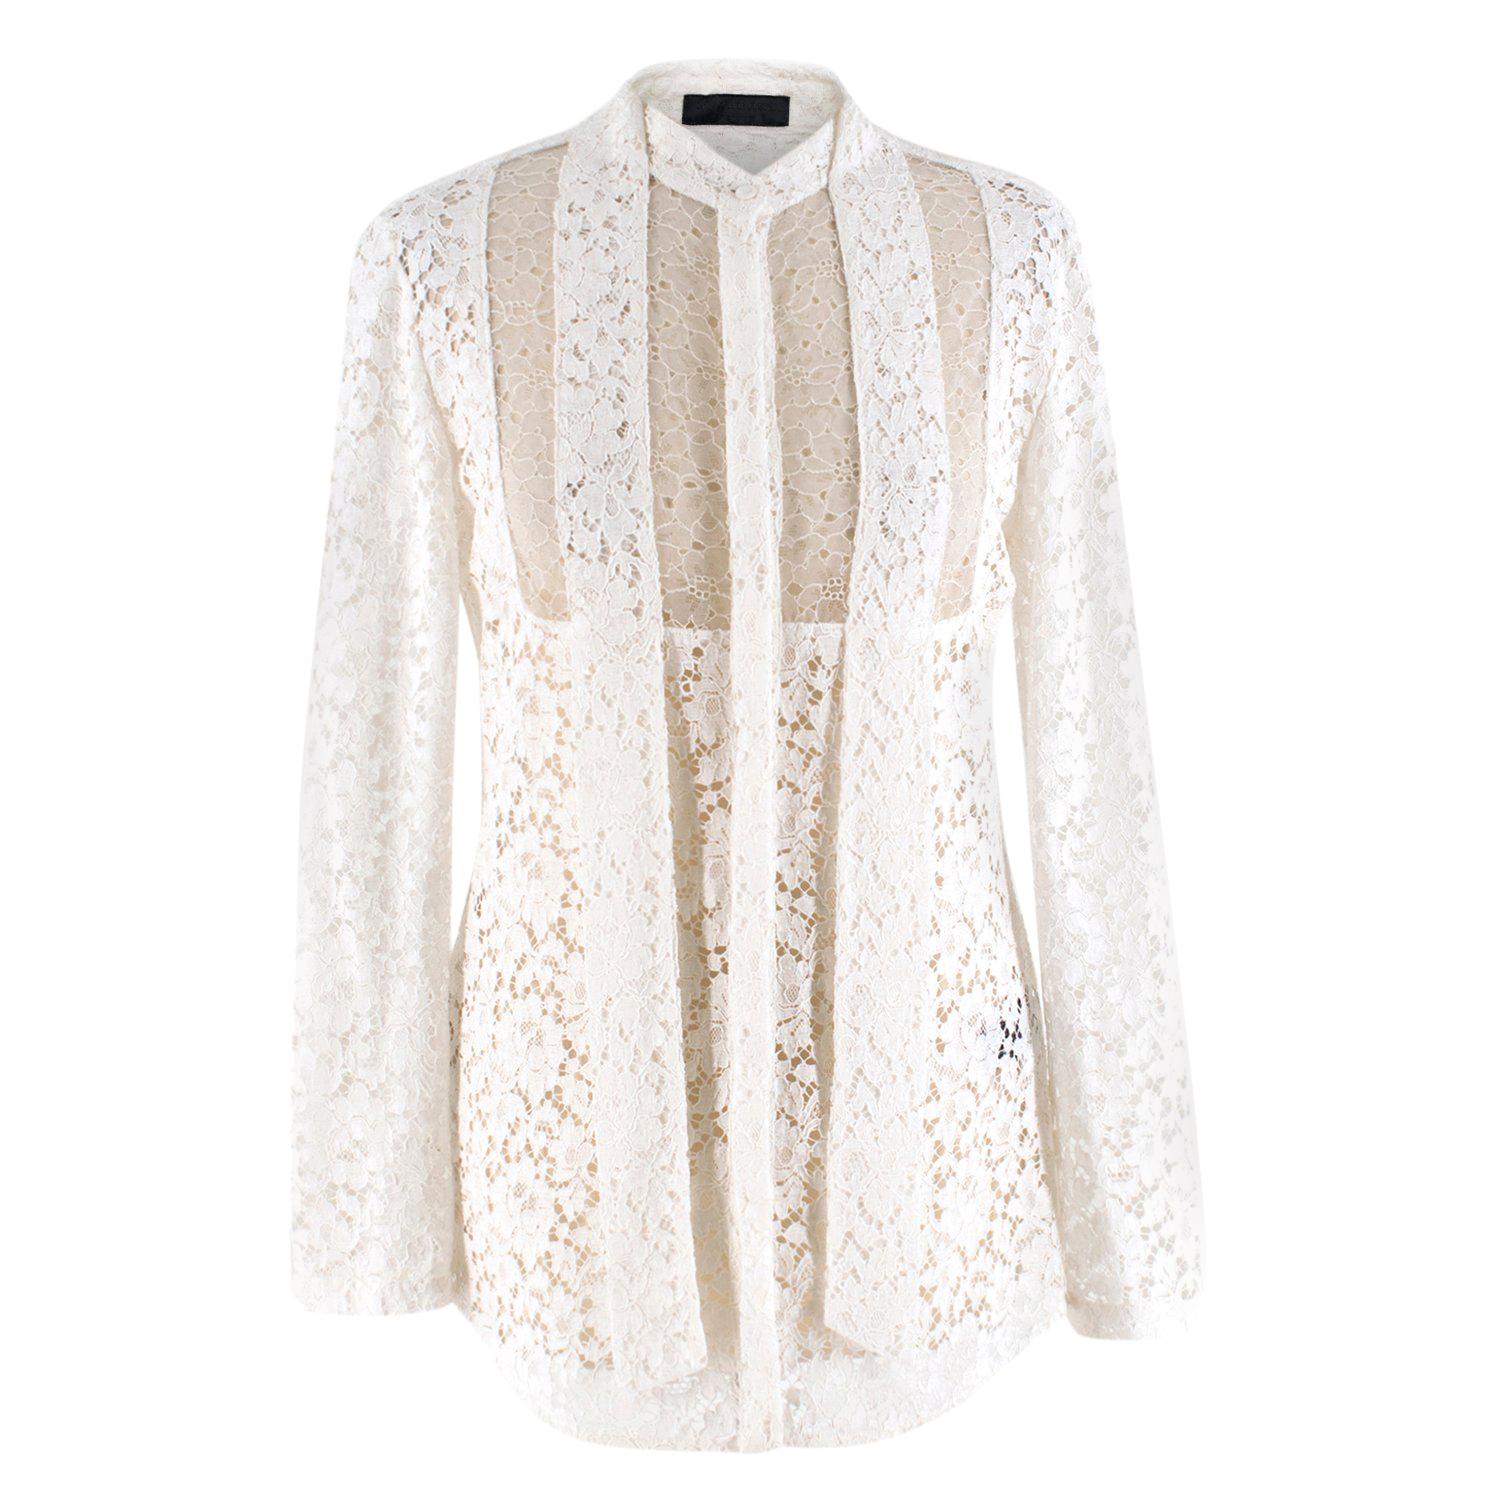 Burberry White Lace Shirt US 6